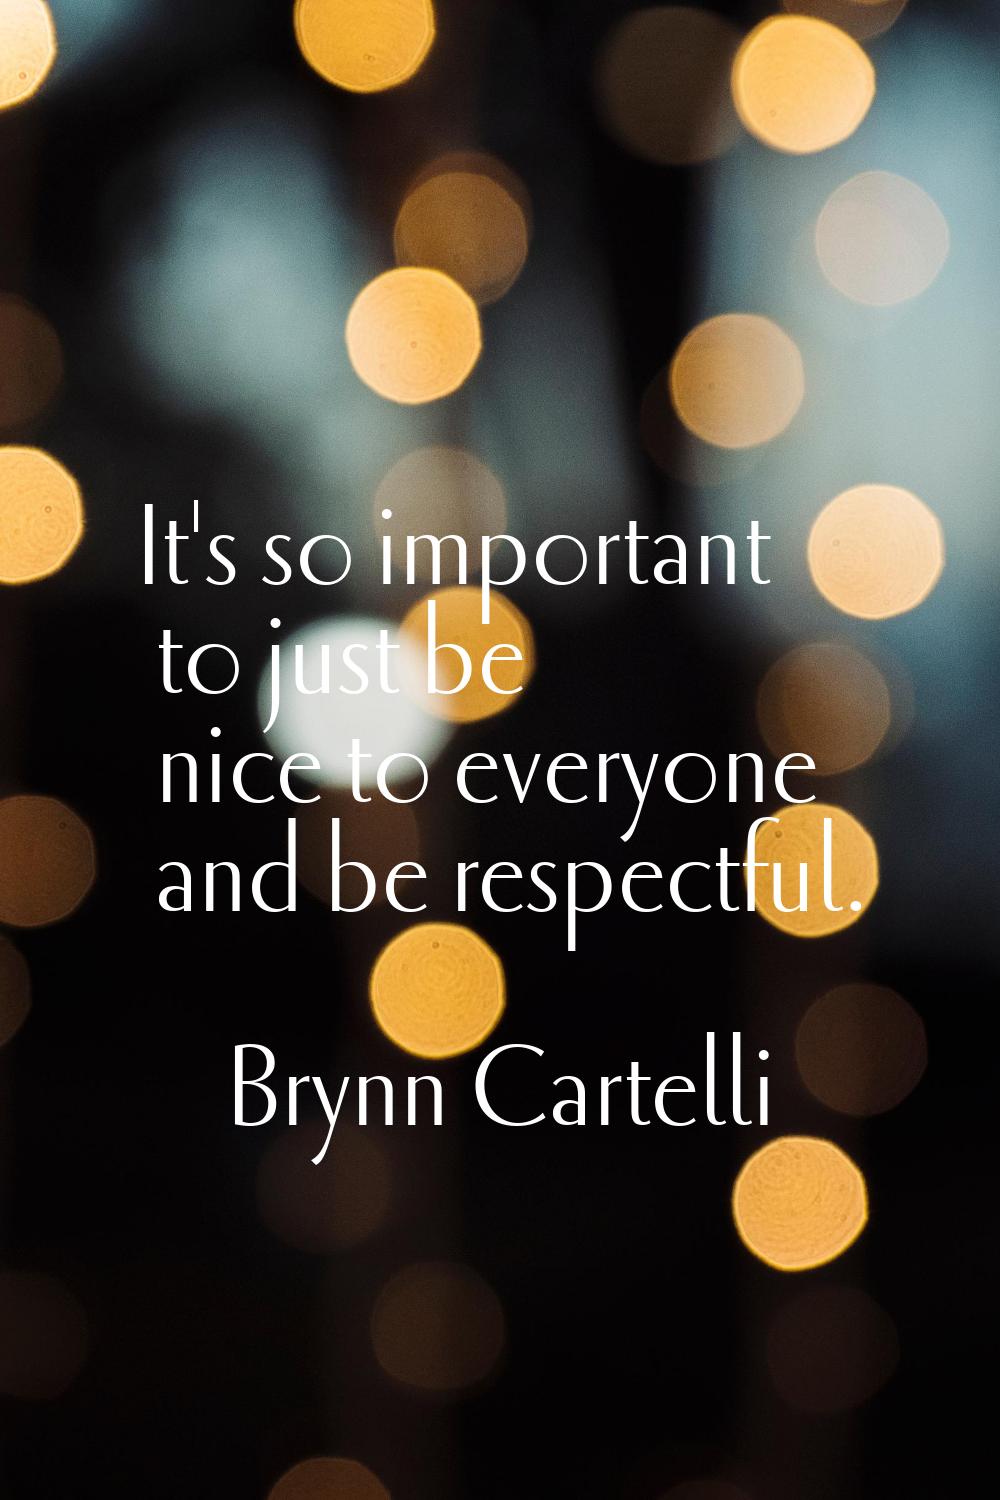 It's so important to just be nice to everyone and be respectful.